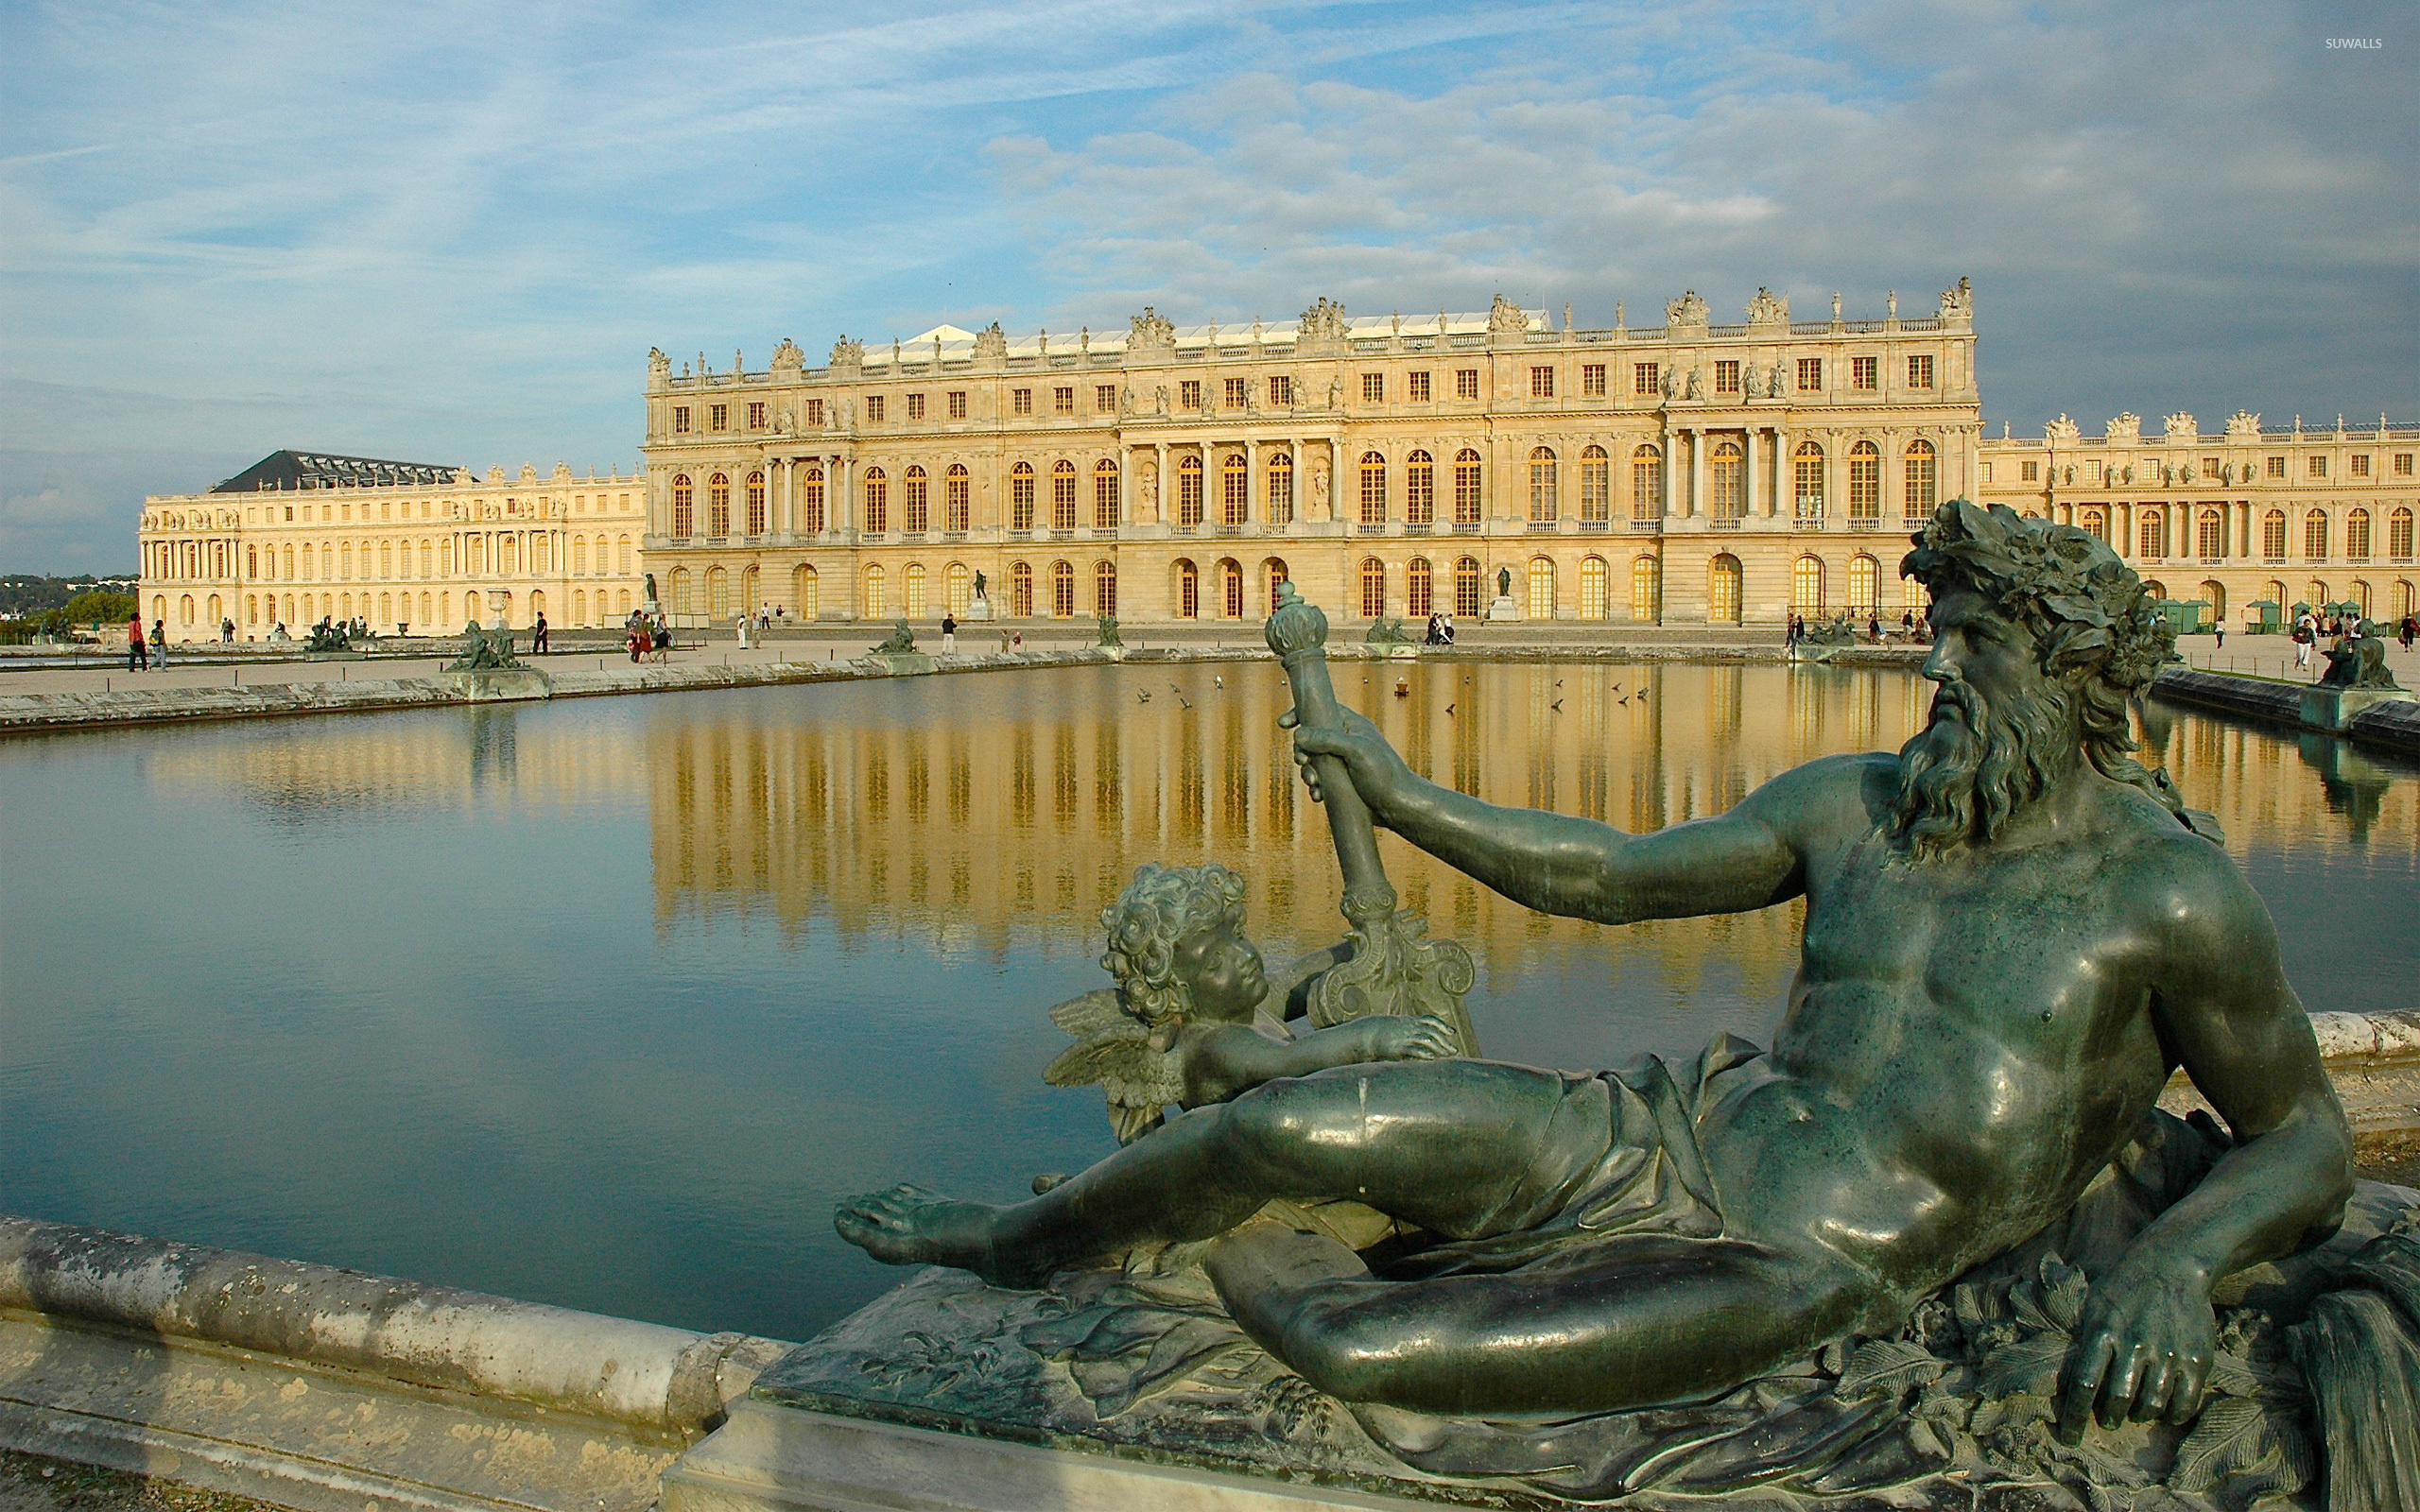 Palace: Palace of Versailles, A World Heritage Site for 40 year, 2,300 rooms. 2560x1600 HD Wallpaper.